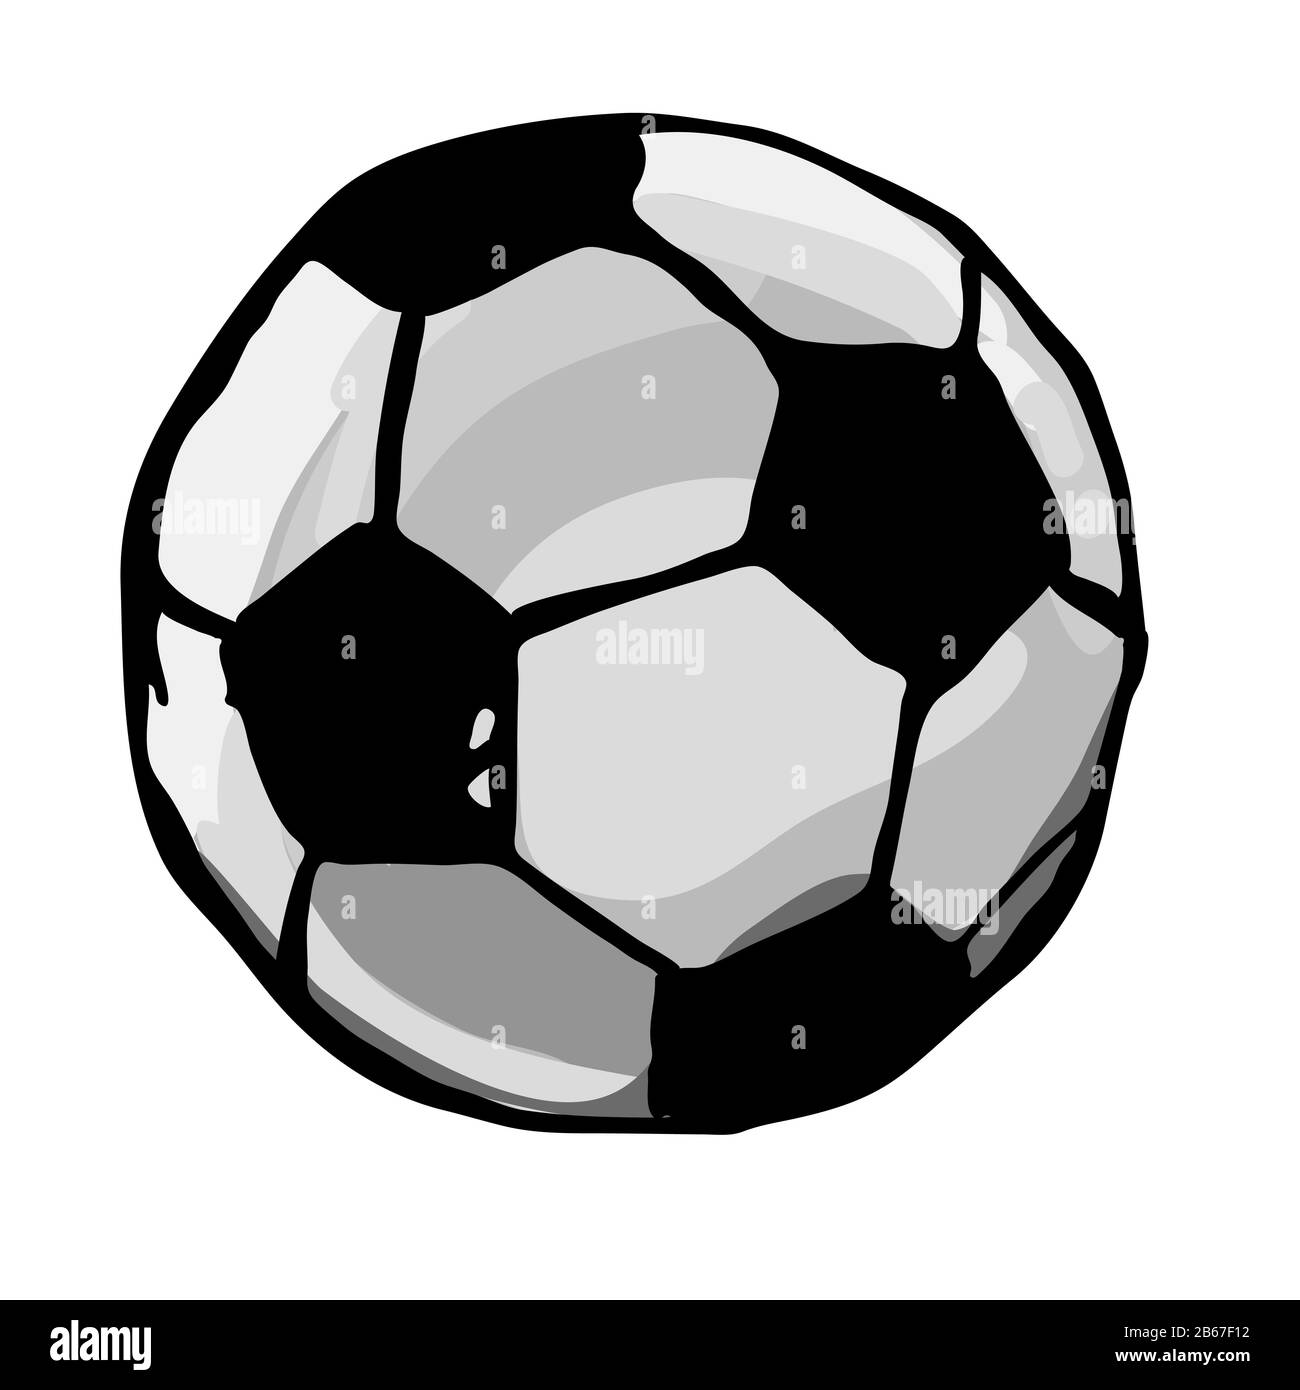 Soccer ball icon isolated on white background. Soccer ball pictogram of a football. Football symbol. Decoration for prints for clothes, posters.Vector Stock Vector